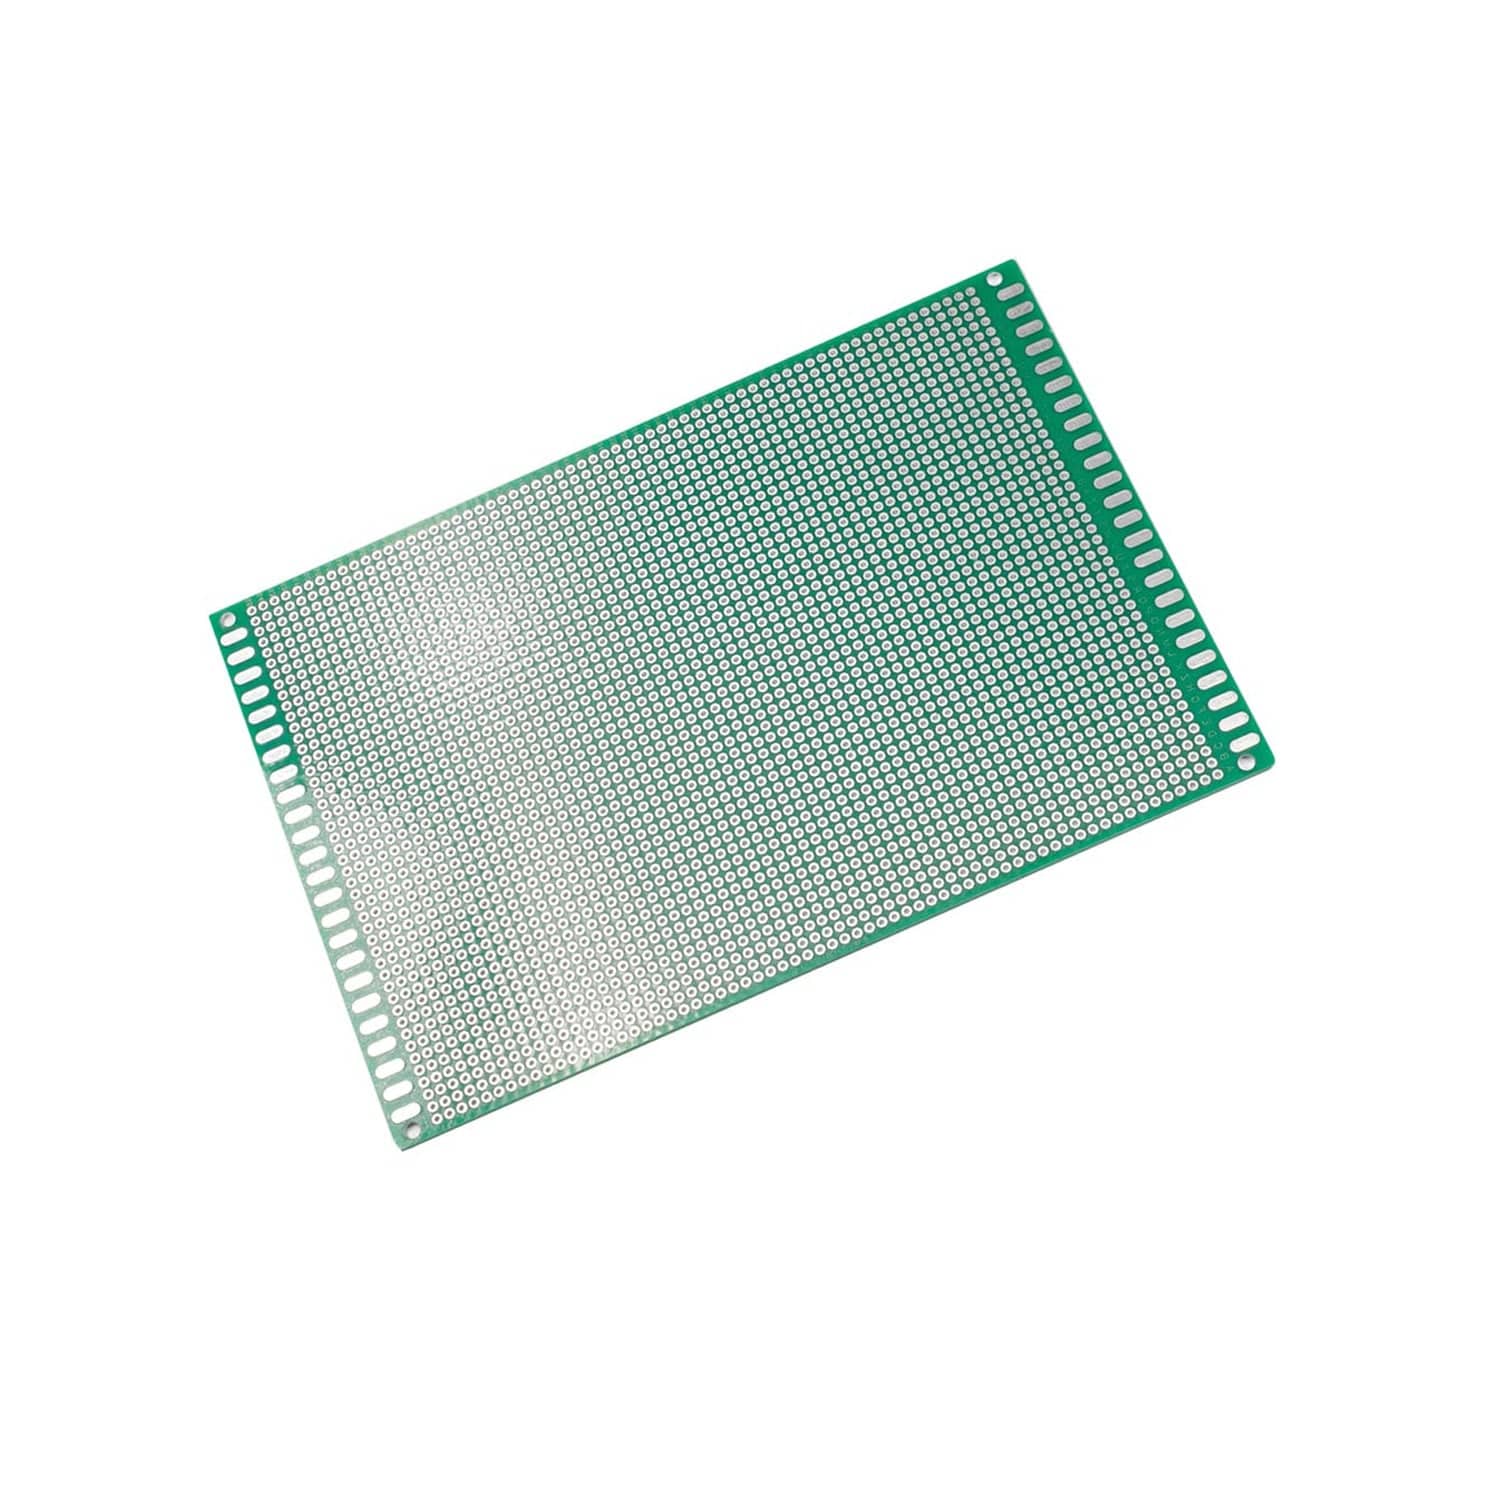 12x18cm Double Sided PCB Board, Universal Soldering PCB